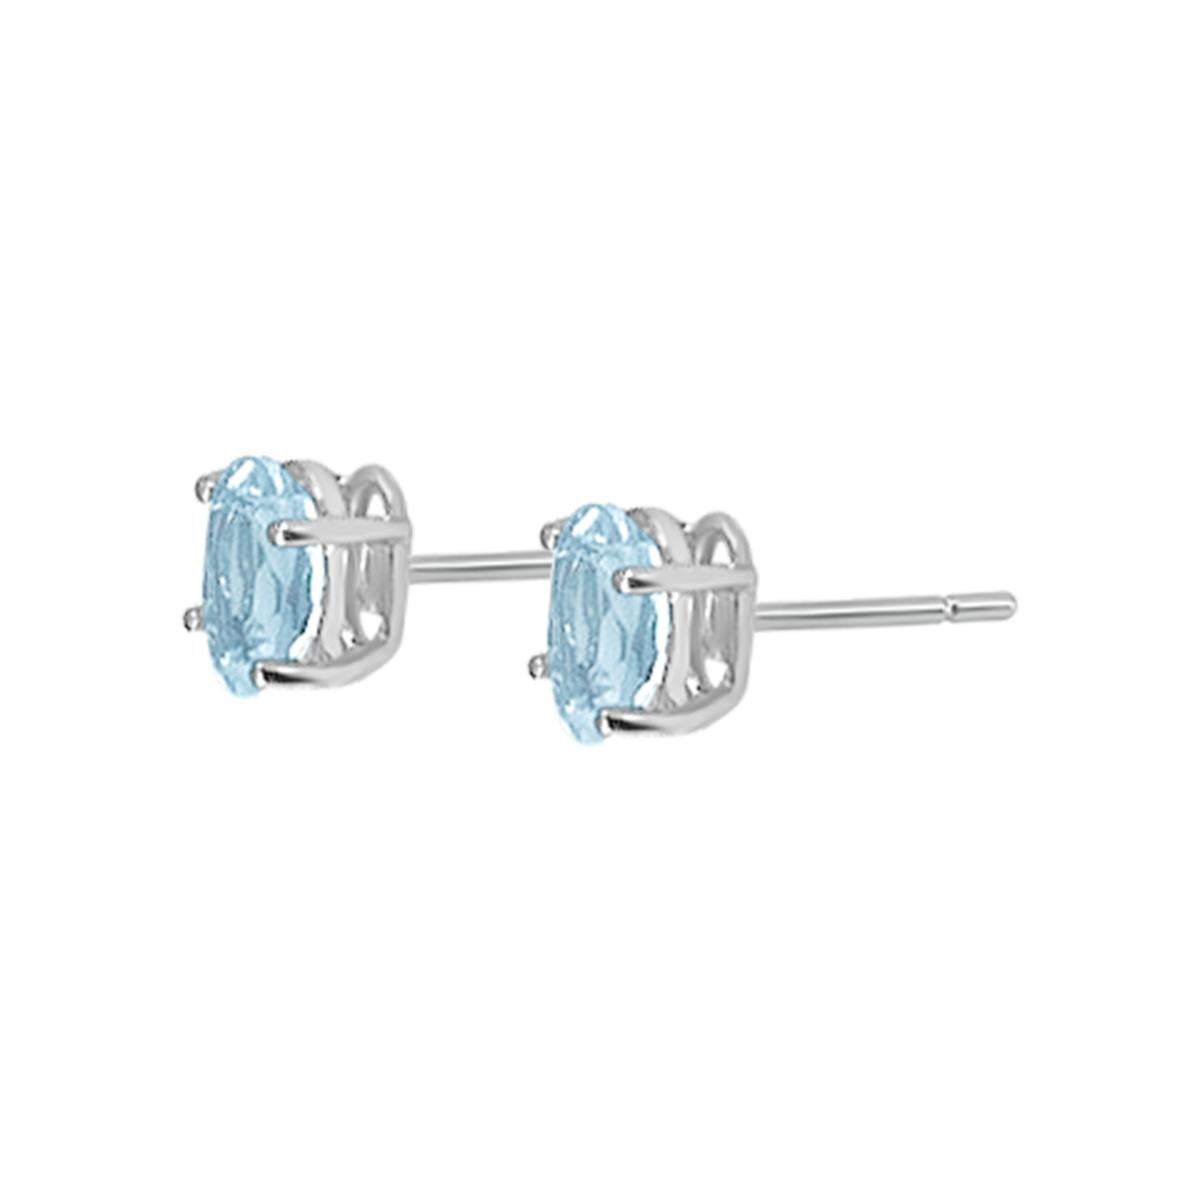 The Shape Of Elegance.
These Oval Shaped Aquamarine Stud Earring Are Designed In 14K White Gold. The Icy Blue 6x4mm Aquamarine Are Prong Set And Draw The Eye With Their Irresistible Radiance.

Style# TS1323AQE
Aquamarine: Oval 6x4mm 0.77cts